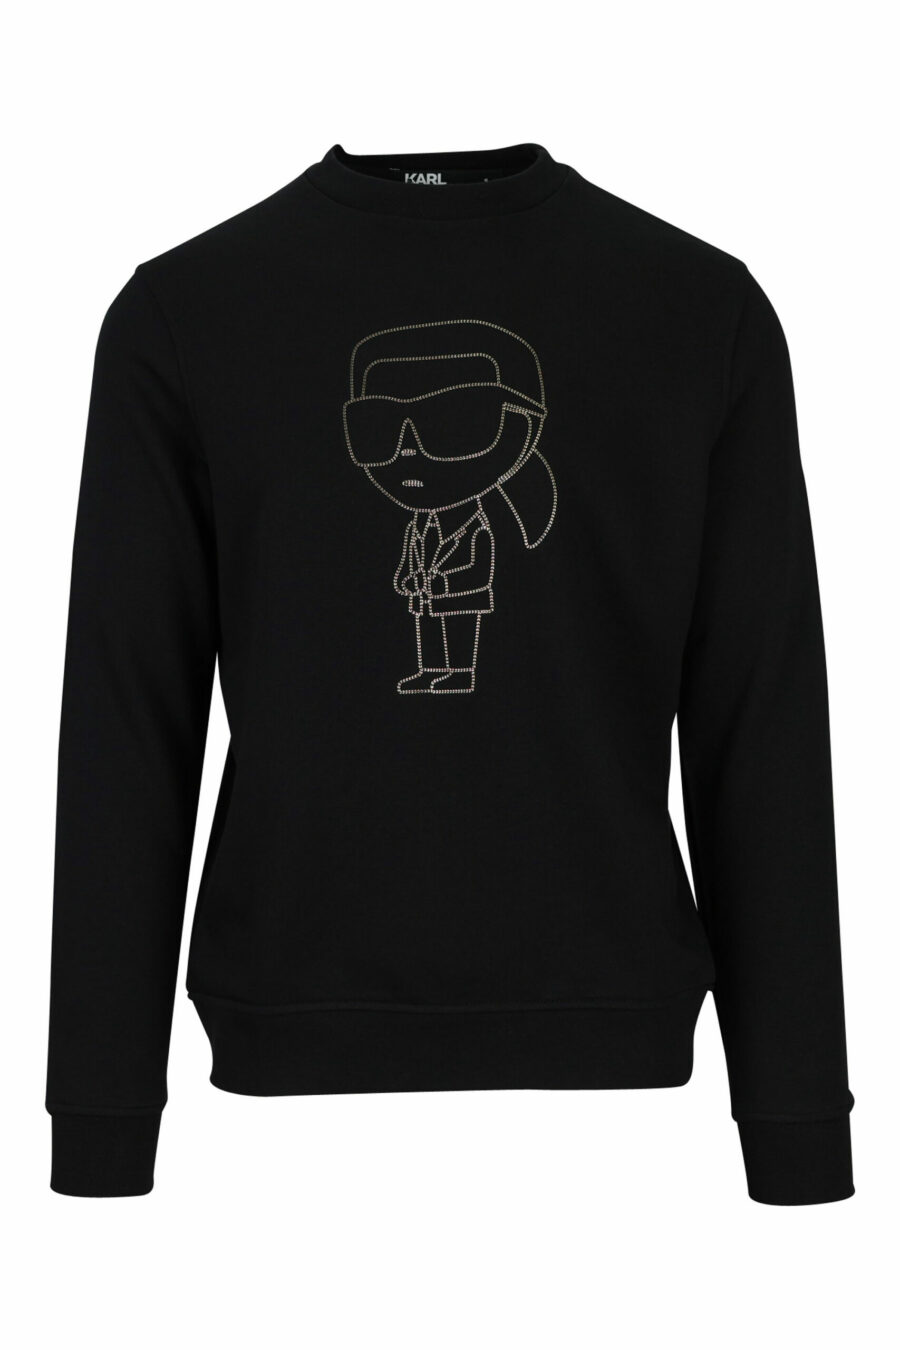 Black sweatshirt with maxilogo "karl" silhouette in gold - 4062226658409 scaled